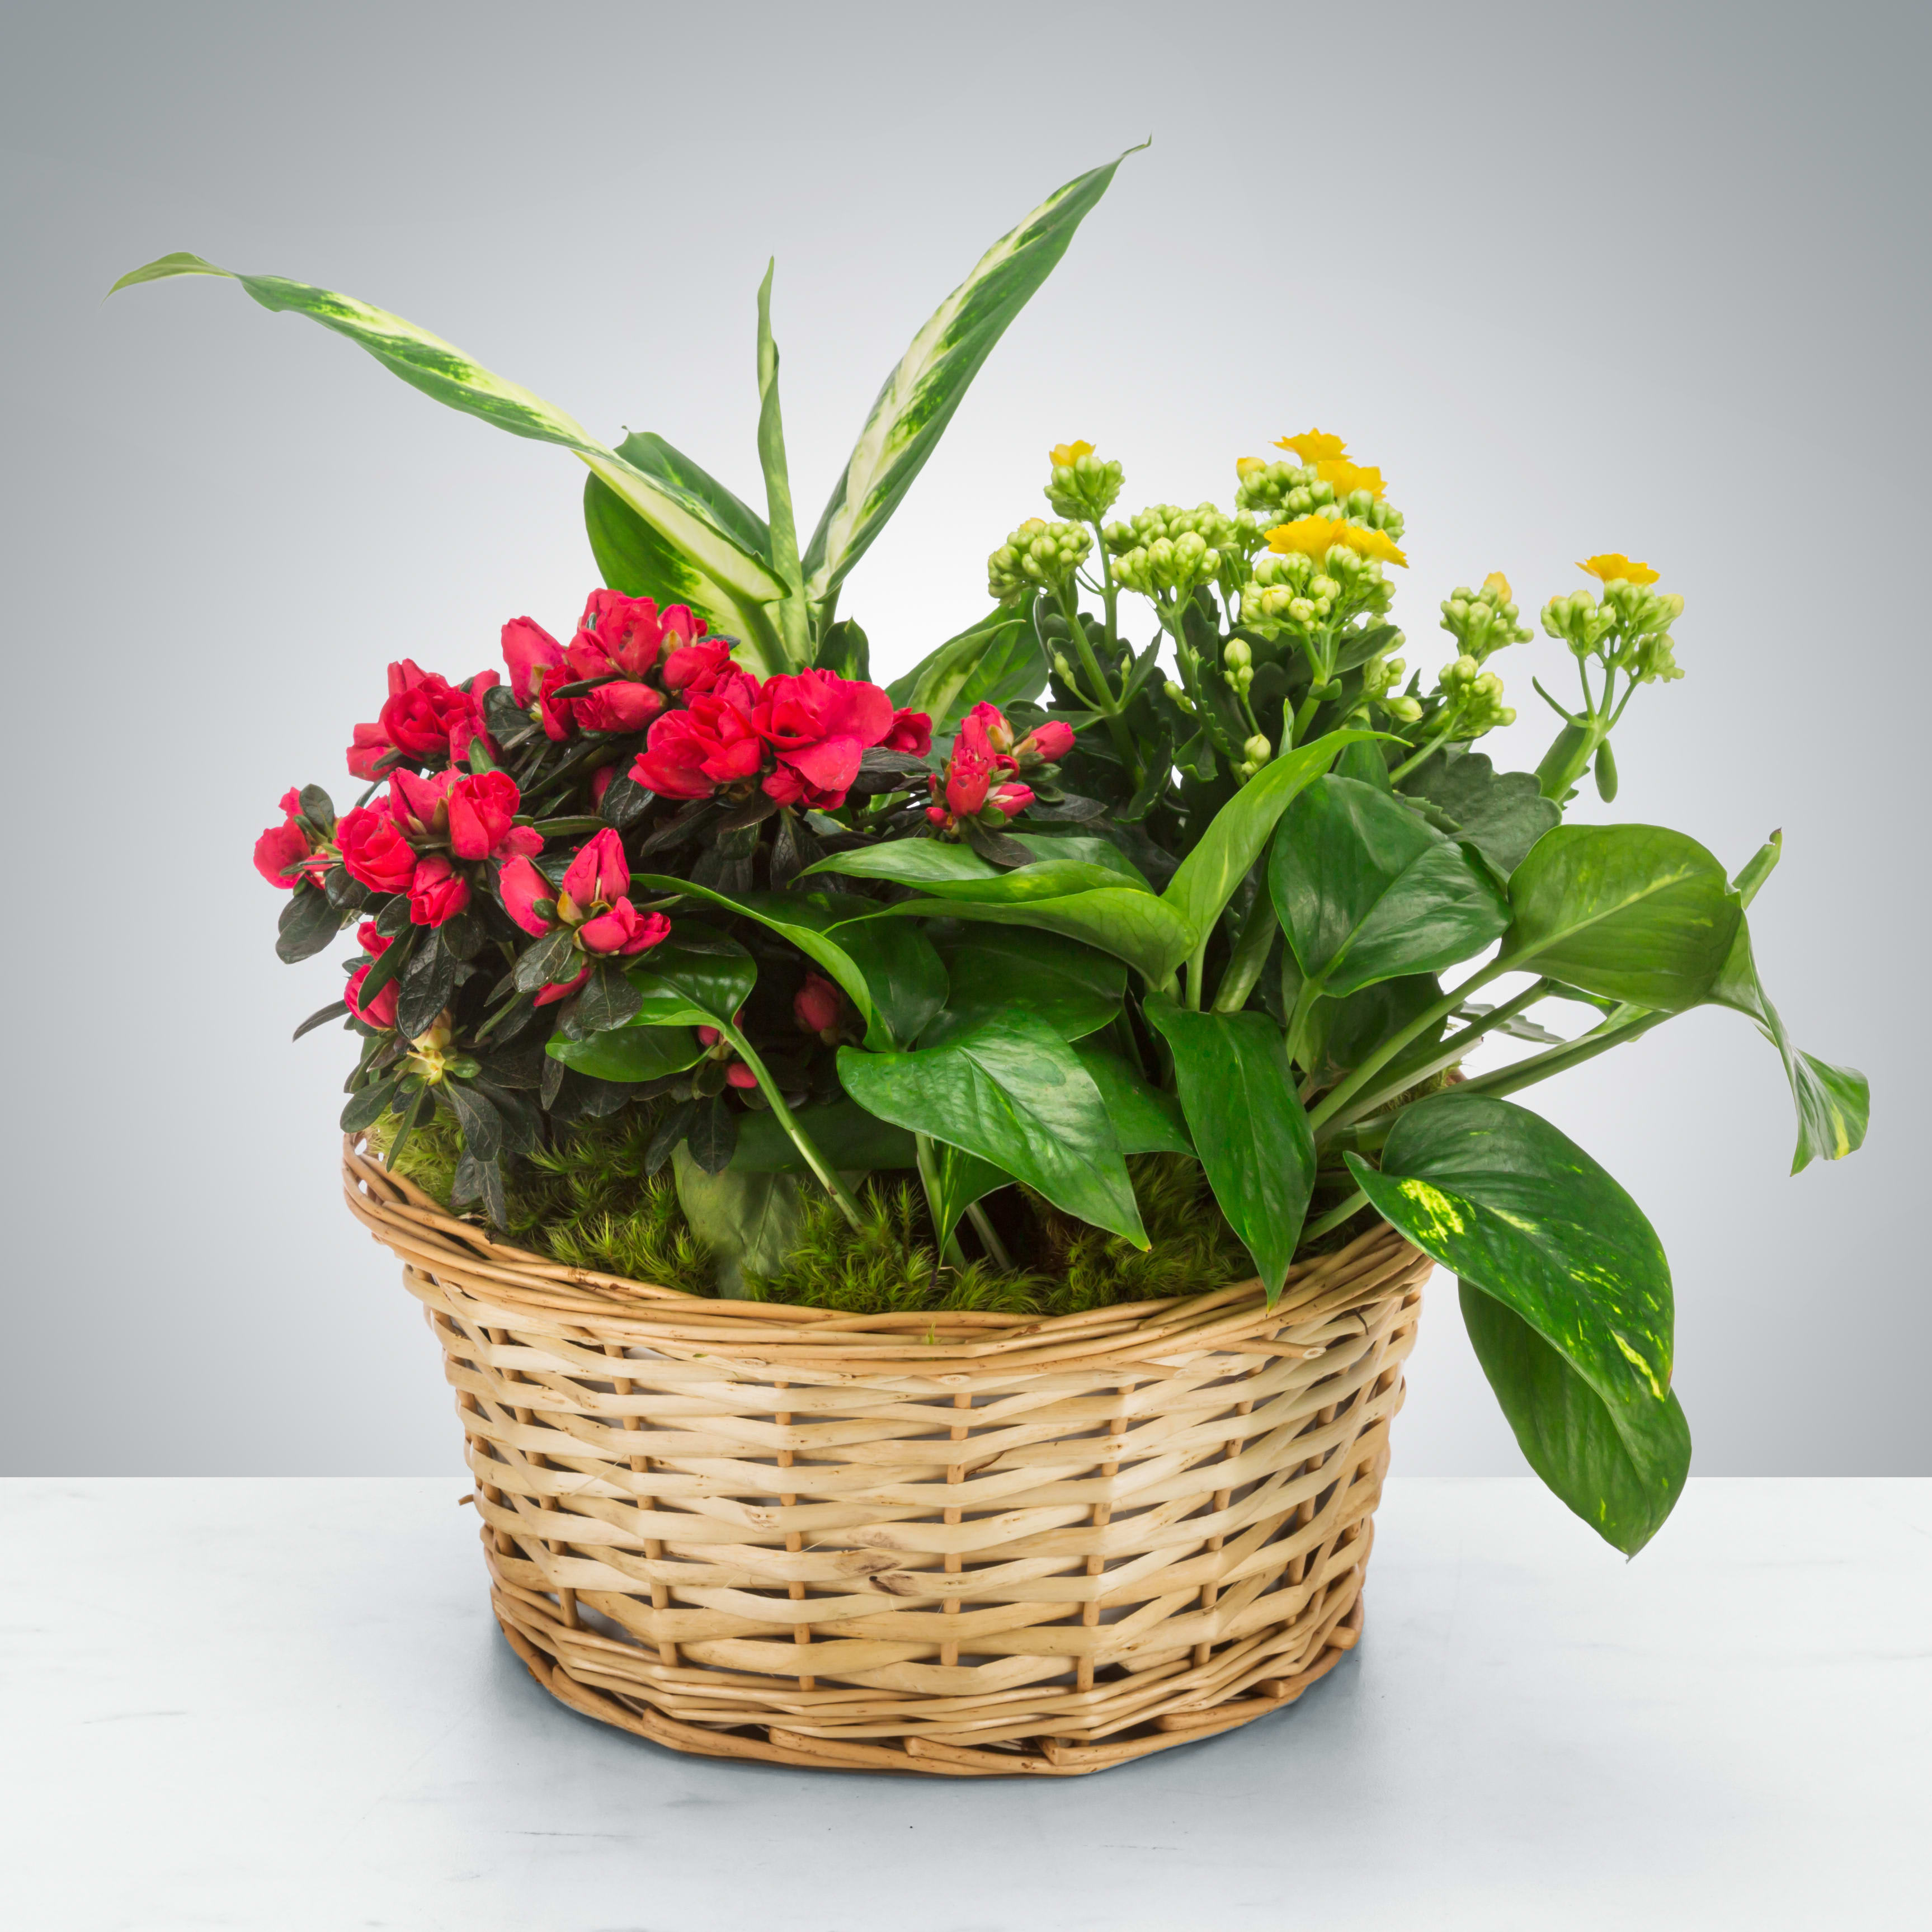 Mixed Plant Basket by BloomNation™ - Send a little garden to somebody. A mix of flowering plants and greenery make an excellent gift for father's day or as a way to say thank you.  Substitutions may be necessary to ensure your arrangement or specialty gift is delivered in a timely manner. The utmost care and attention is given to your order to ensure that it is as similar as possible to the requested item.